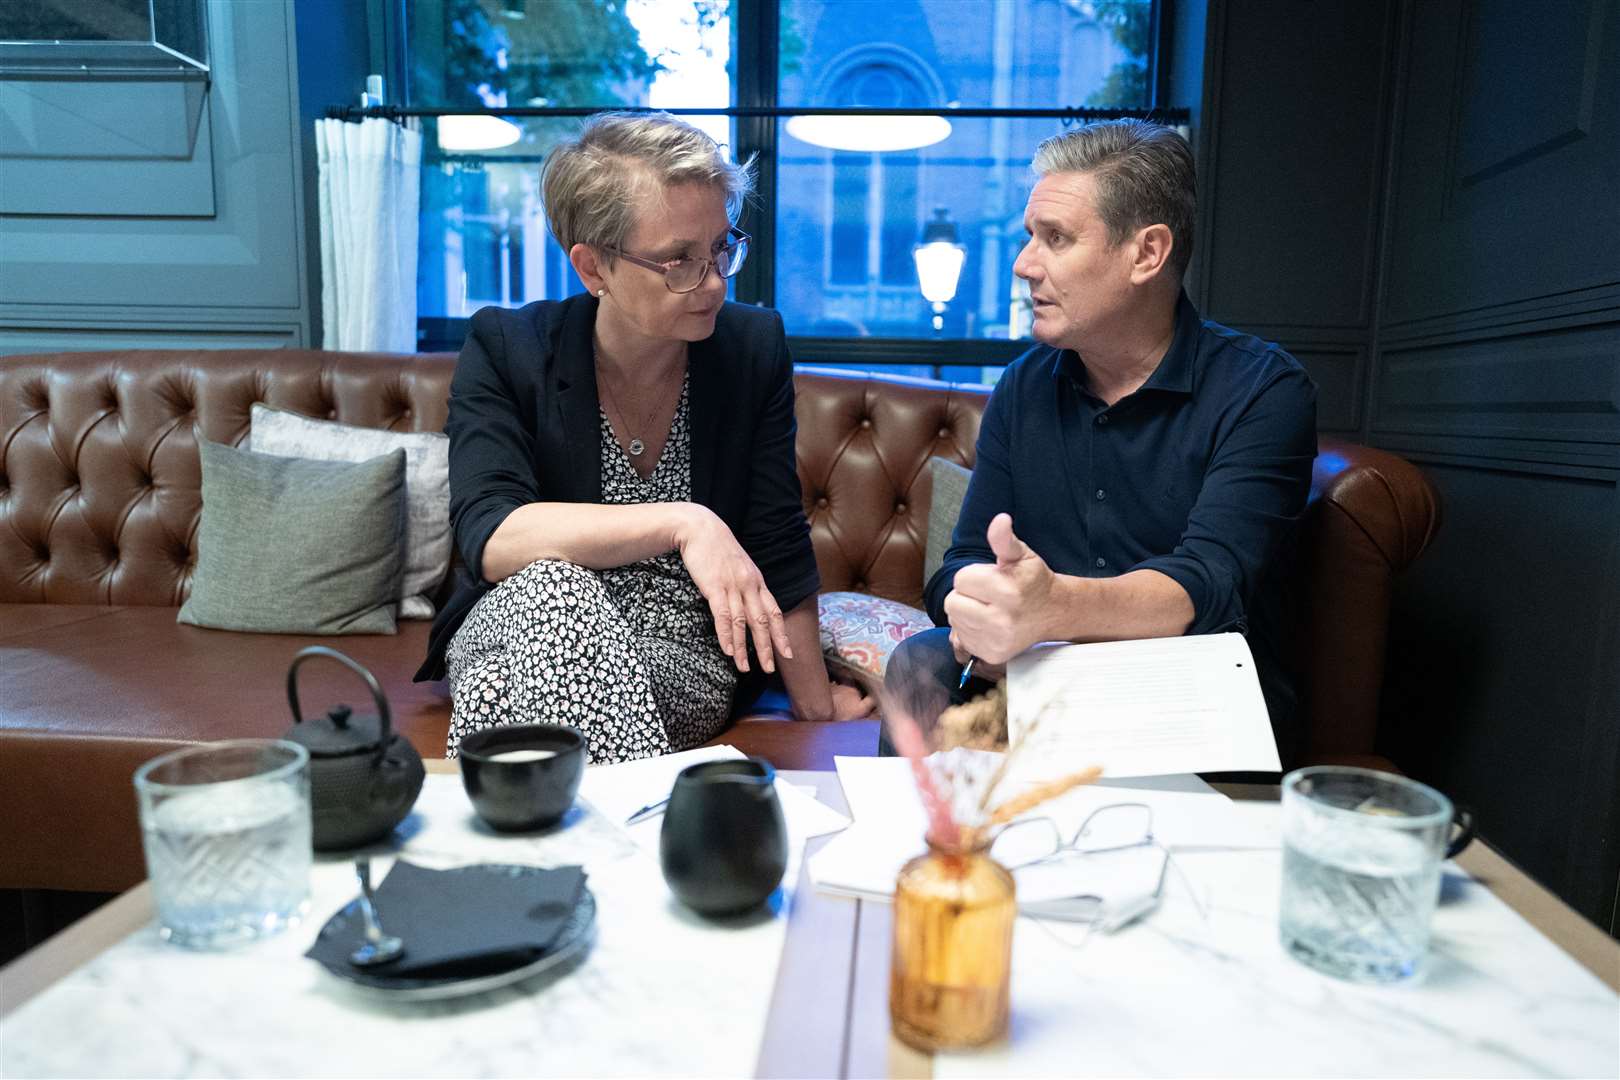 Labour leader Sir Keir Starmer and shadow home secretary Yvette Cooper work in their hotel in The Hague (Stefan Rousseau/PA)